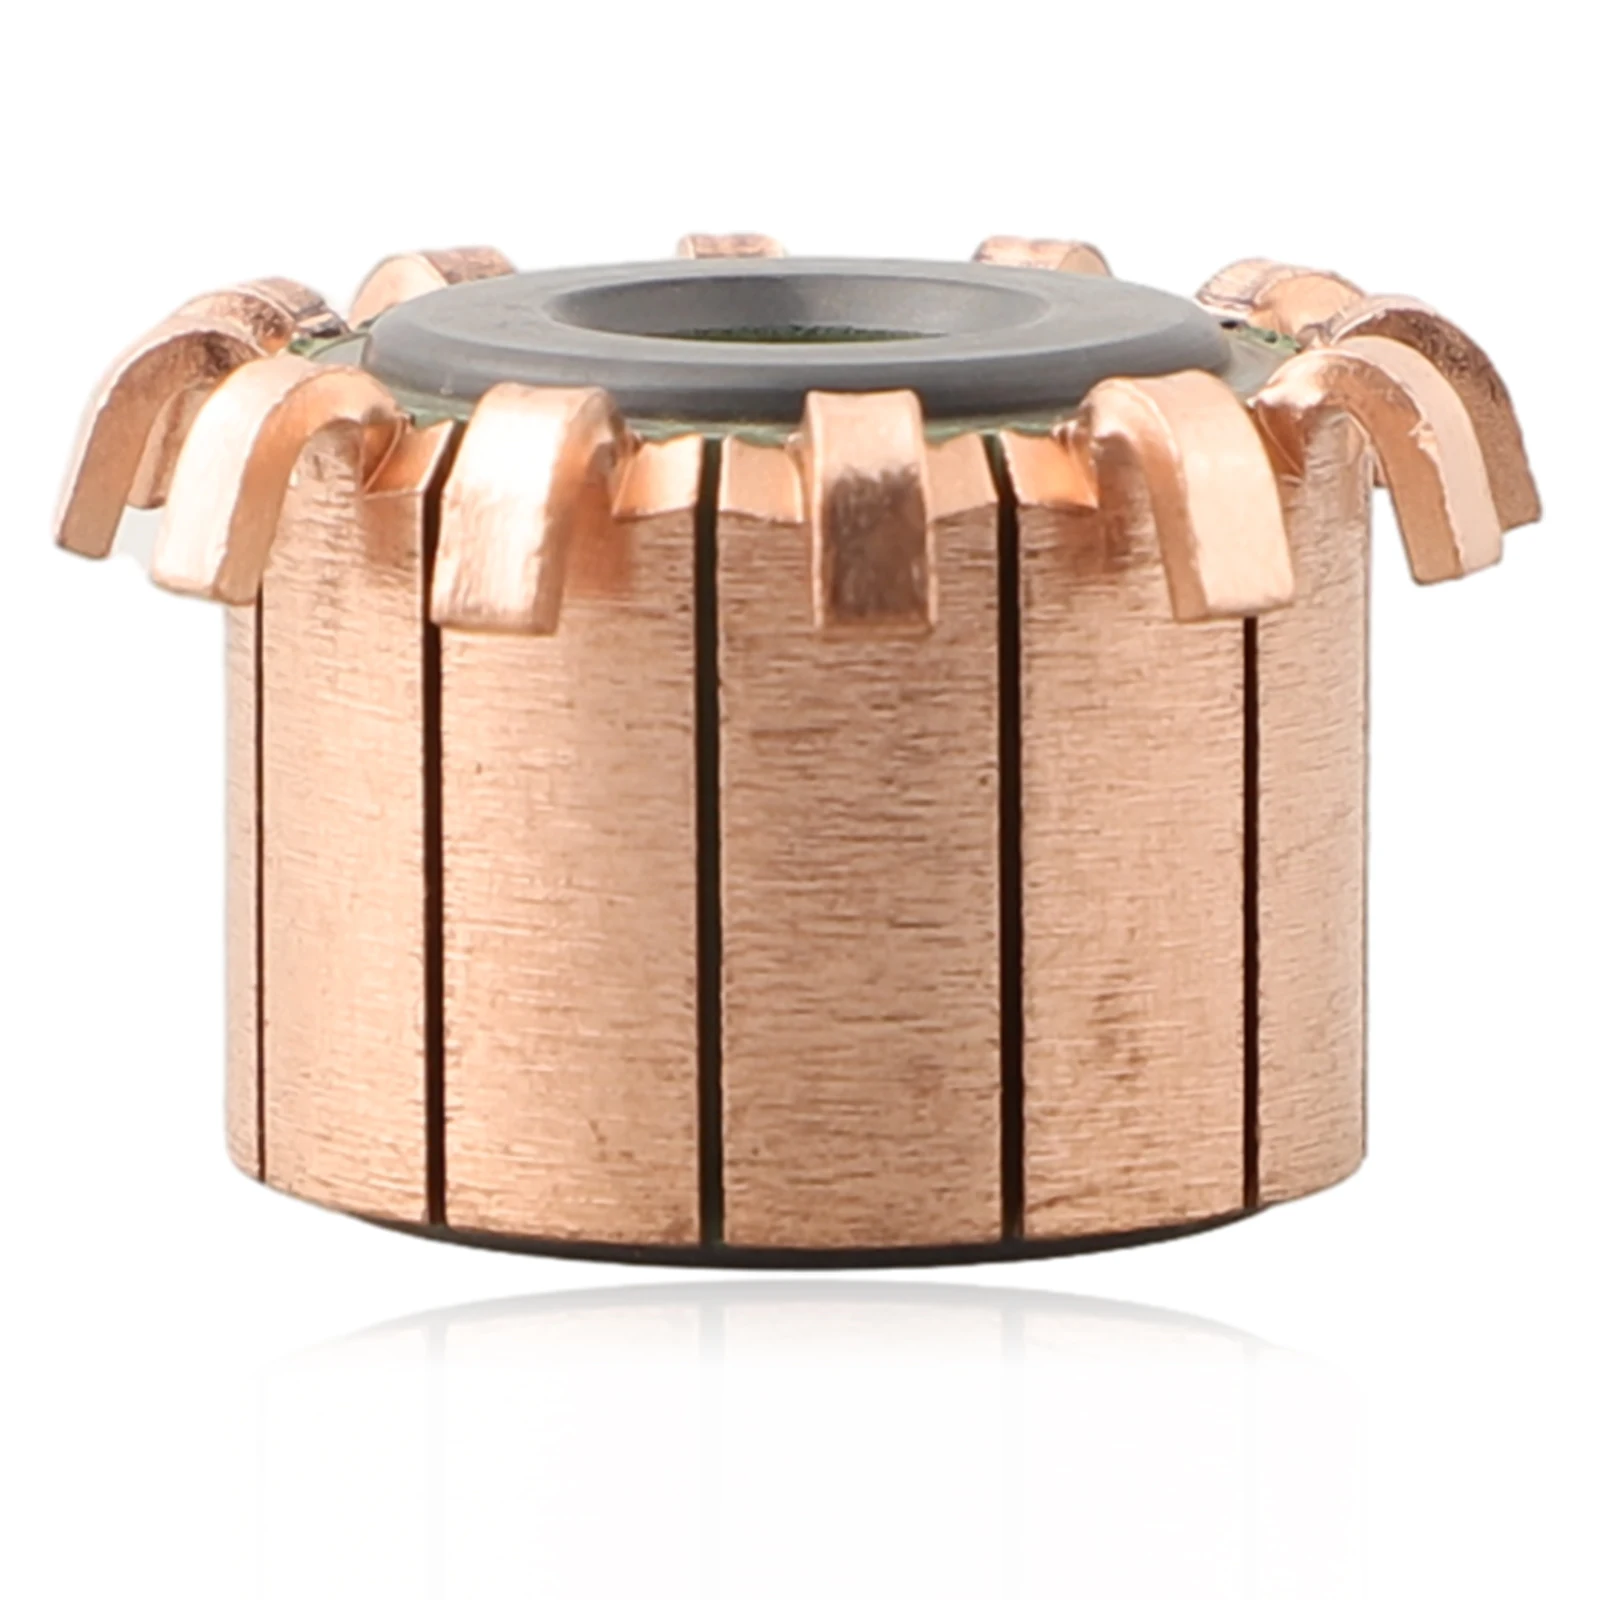 1pc 12P Teeth Copper Hook Type Electrical Motor Commutator CHY-3389-12 For Power Tools High-speed DC Motors Commutator 8x23x17mm new practical high speed rotations high speed rotations hook type copper hook type gear teeth high speed dc motors